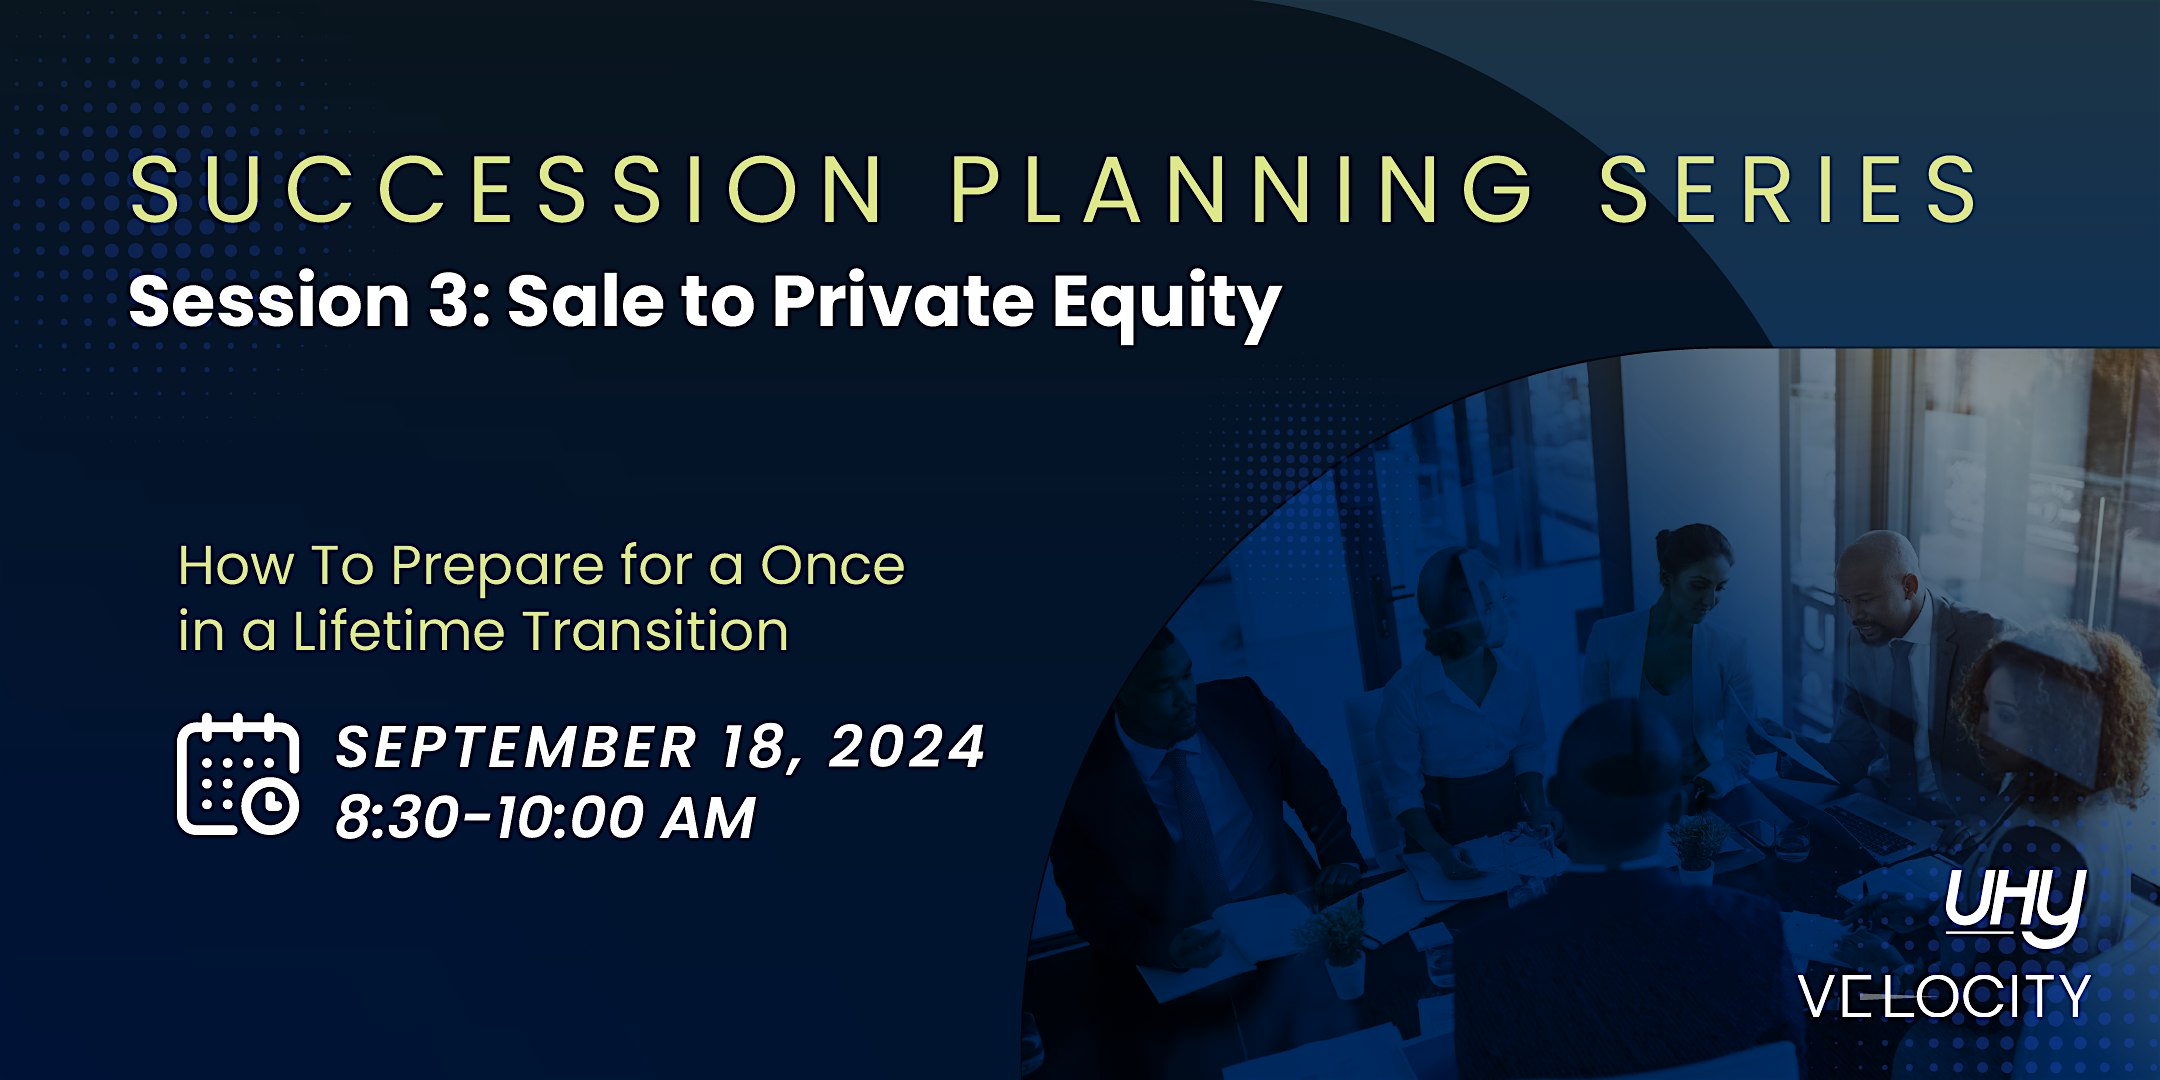 Succession Planning Series: Sale to Private Equity Session 3